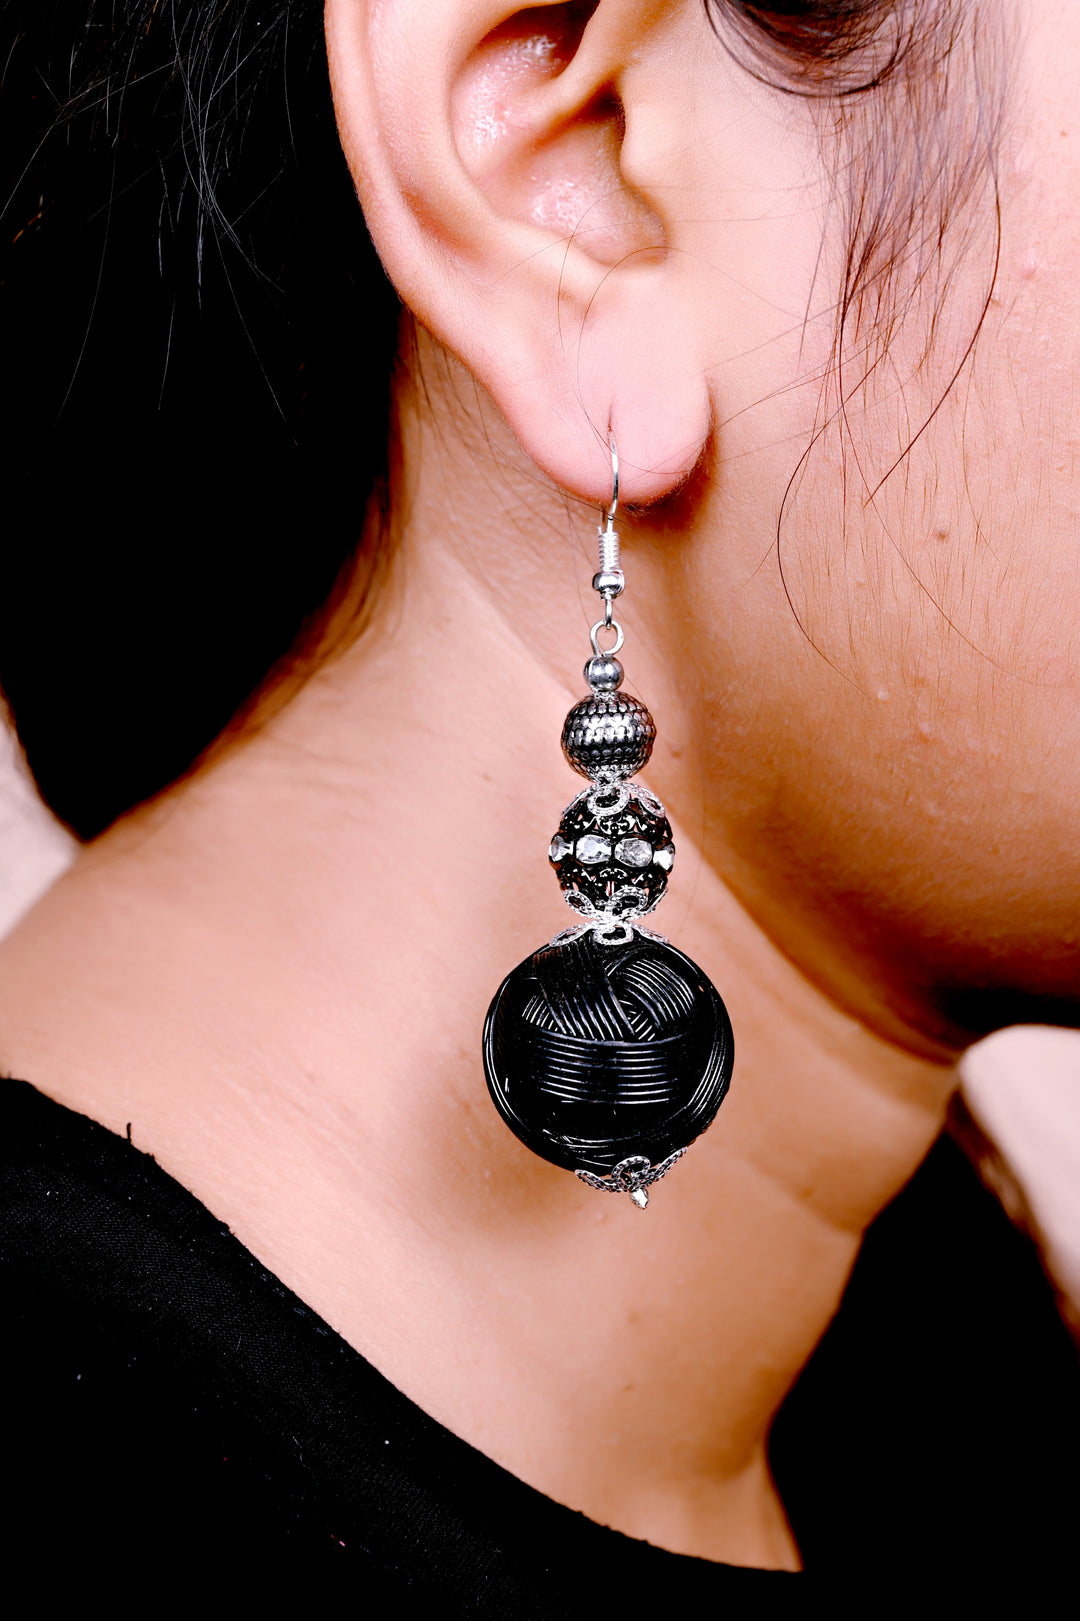 Black Metal Wire Balls Earring Styled With Metal Charms